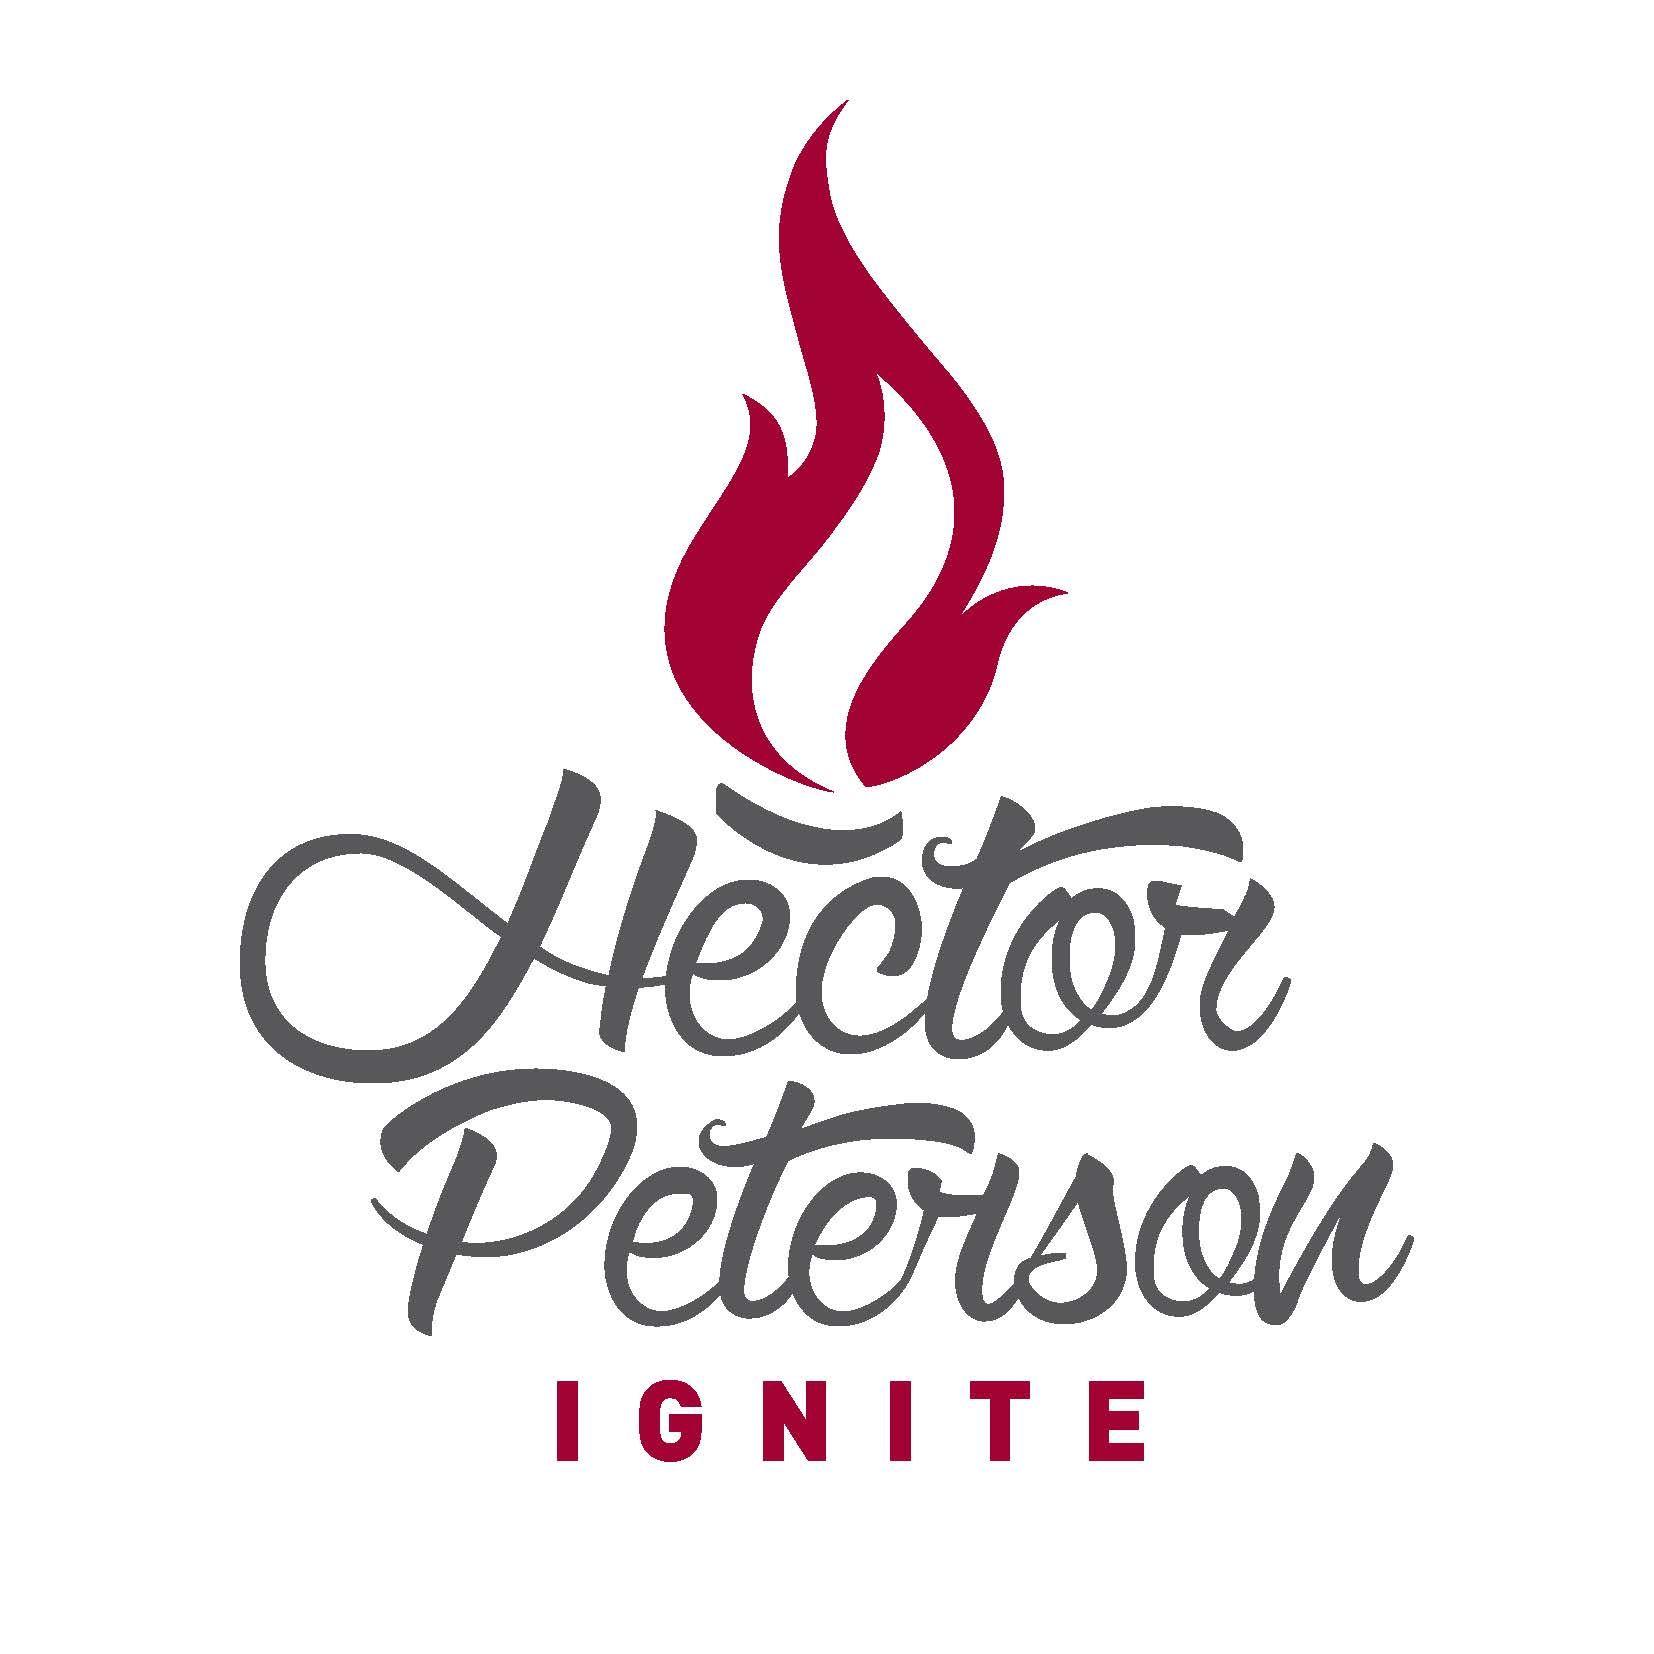 Hector Logo - University of the Free State, Qwaqwa Campus, Hector Peterson